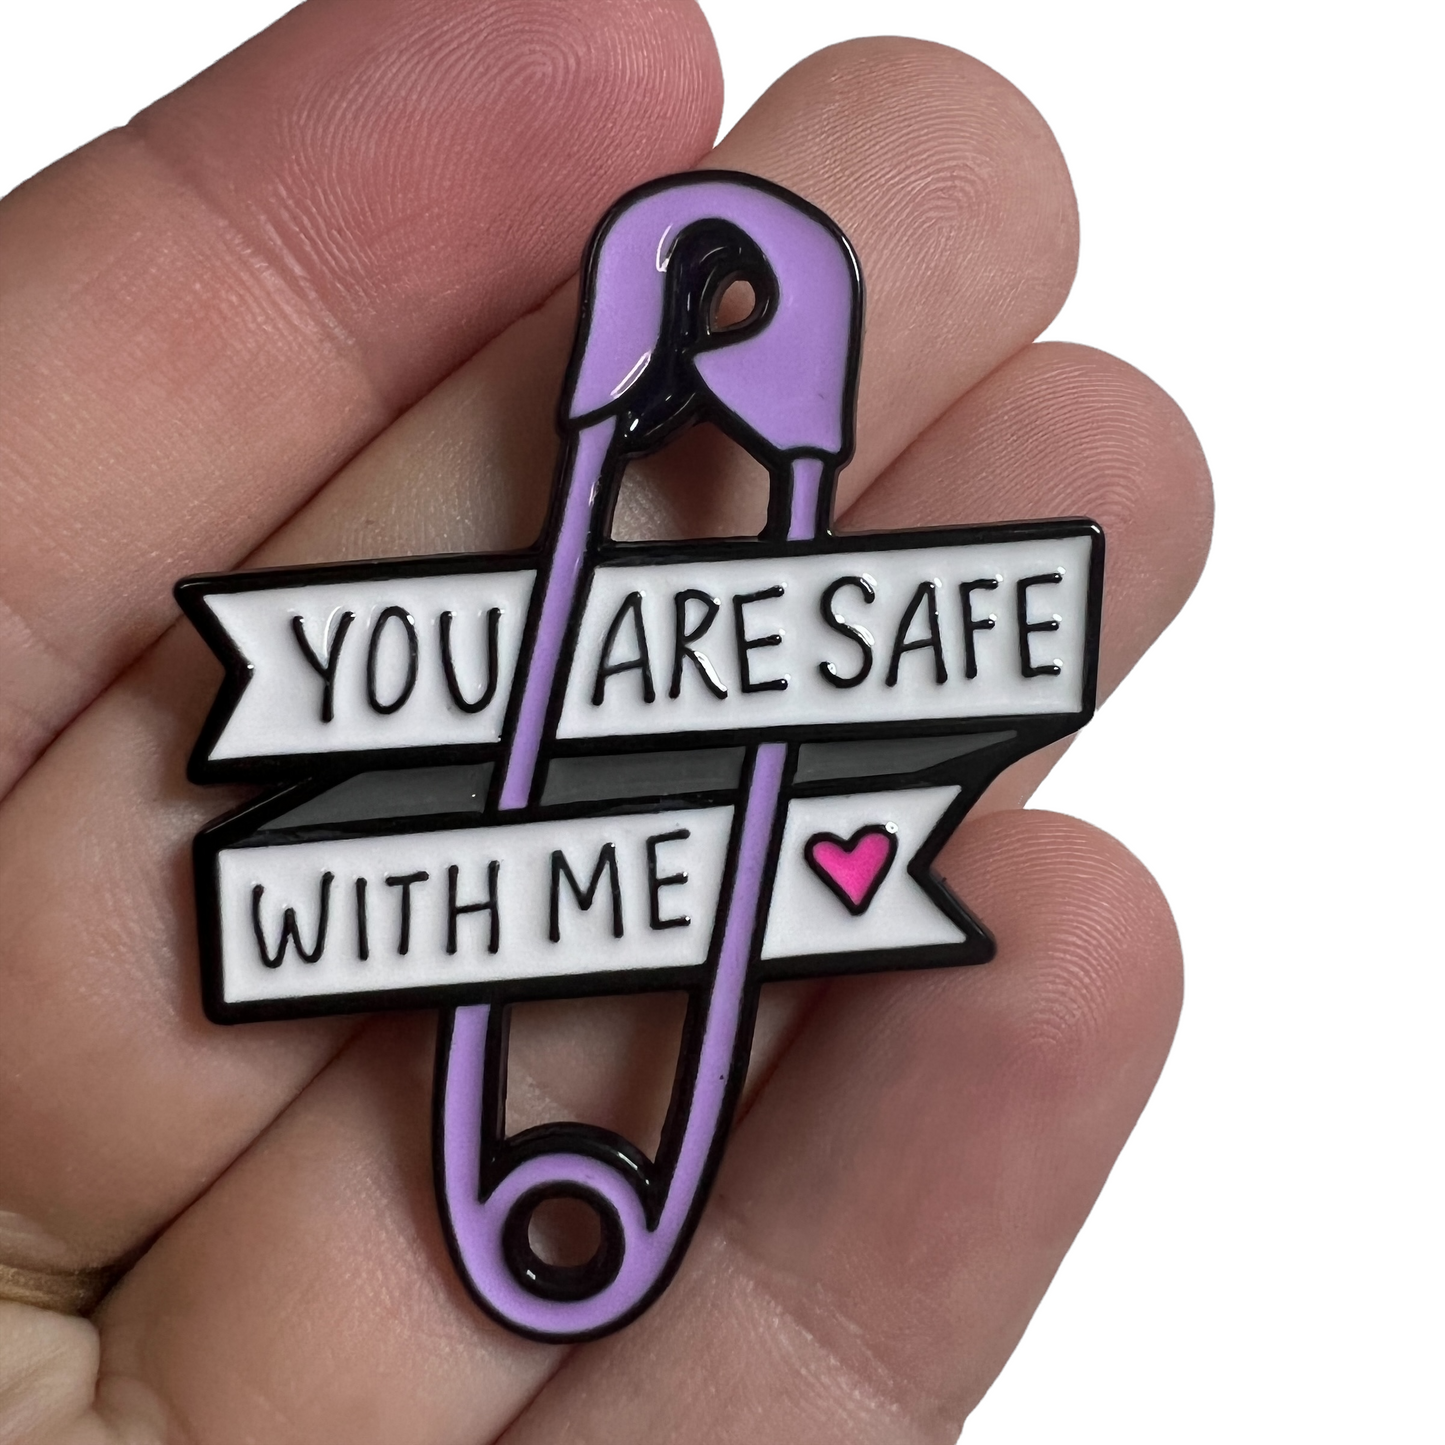 Pin — 'You Are Safe With Me'  SPIRIT SPARKPLUGS You Are Safe With Me  